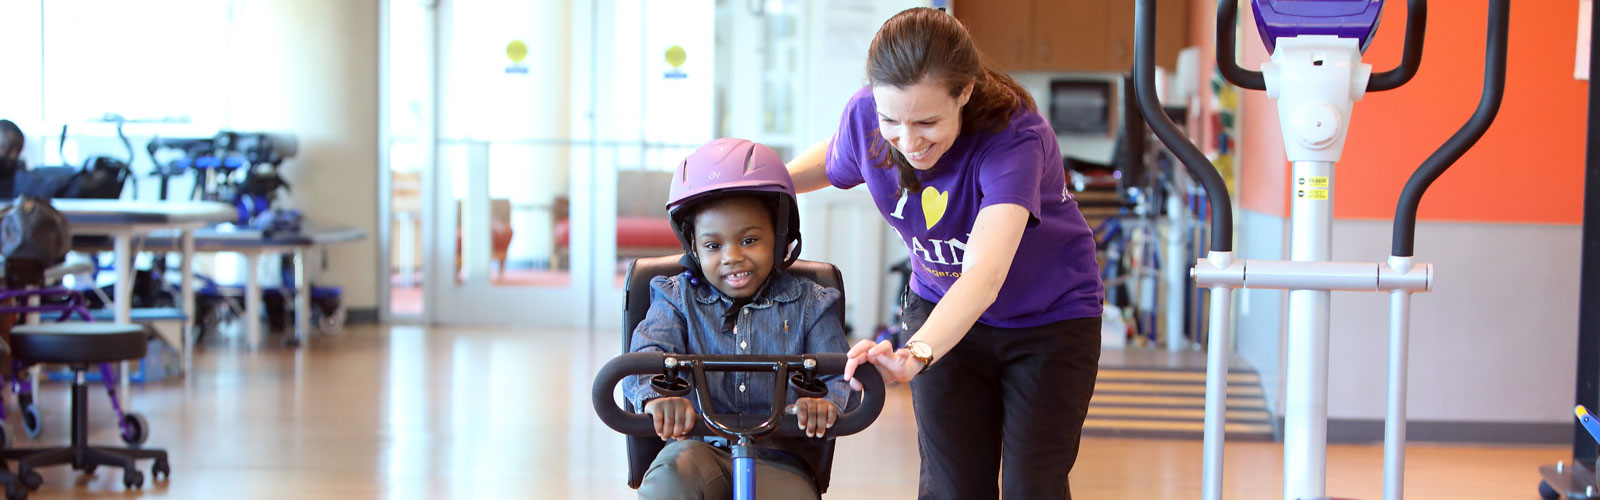 Journee, a patient at Phelps Center, rides a bike with the assistance of her therapist.